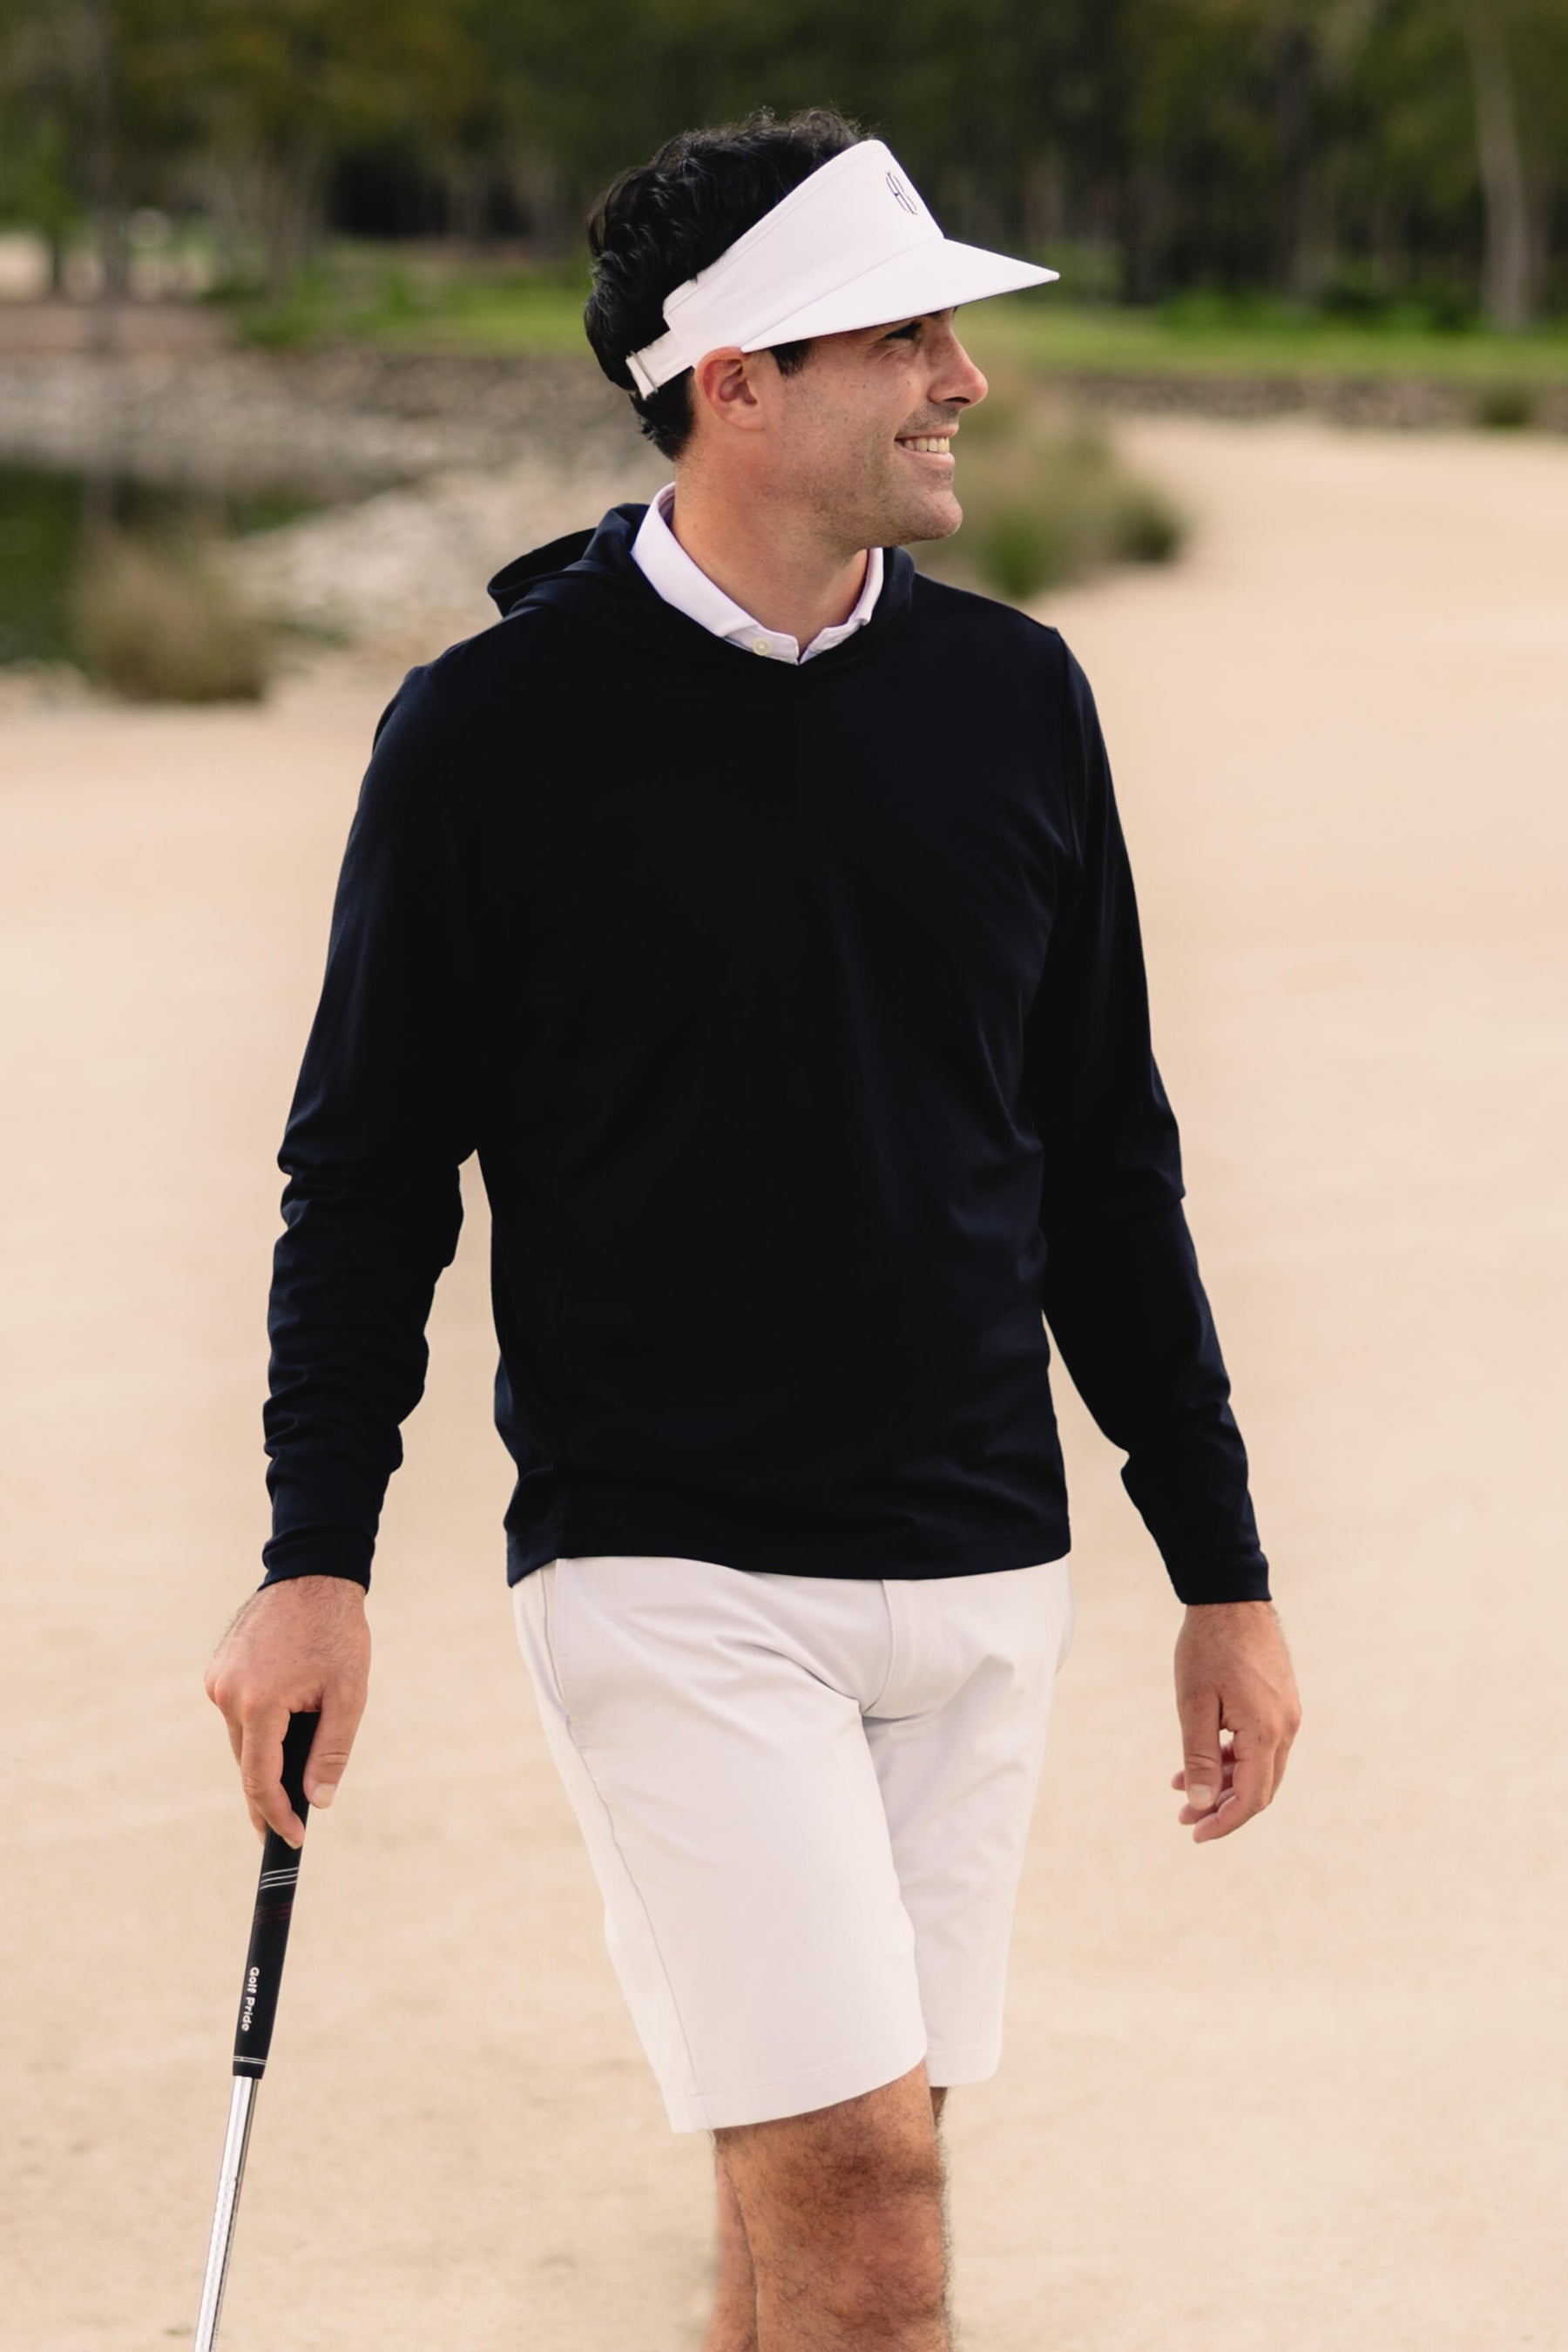 Golfer wearing black sweater and shorts